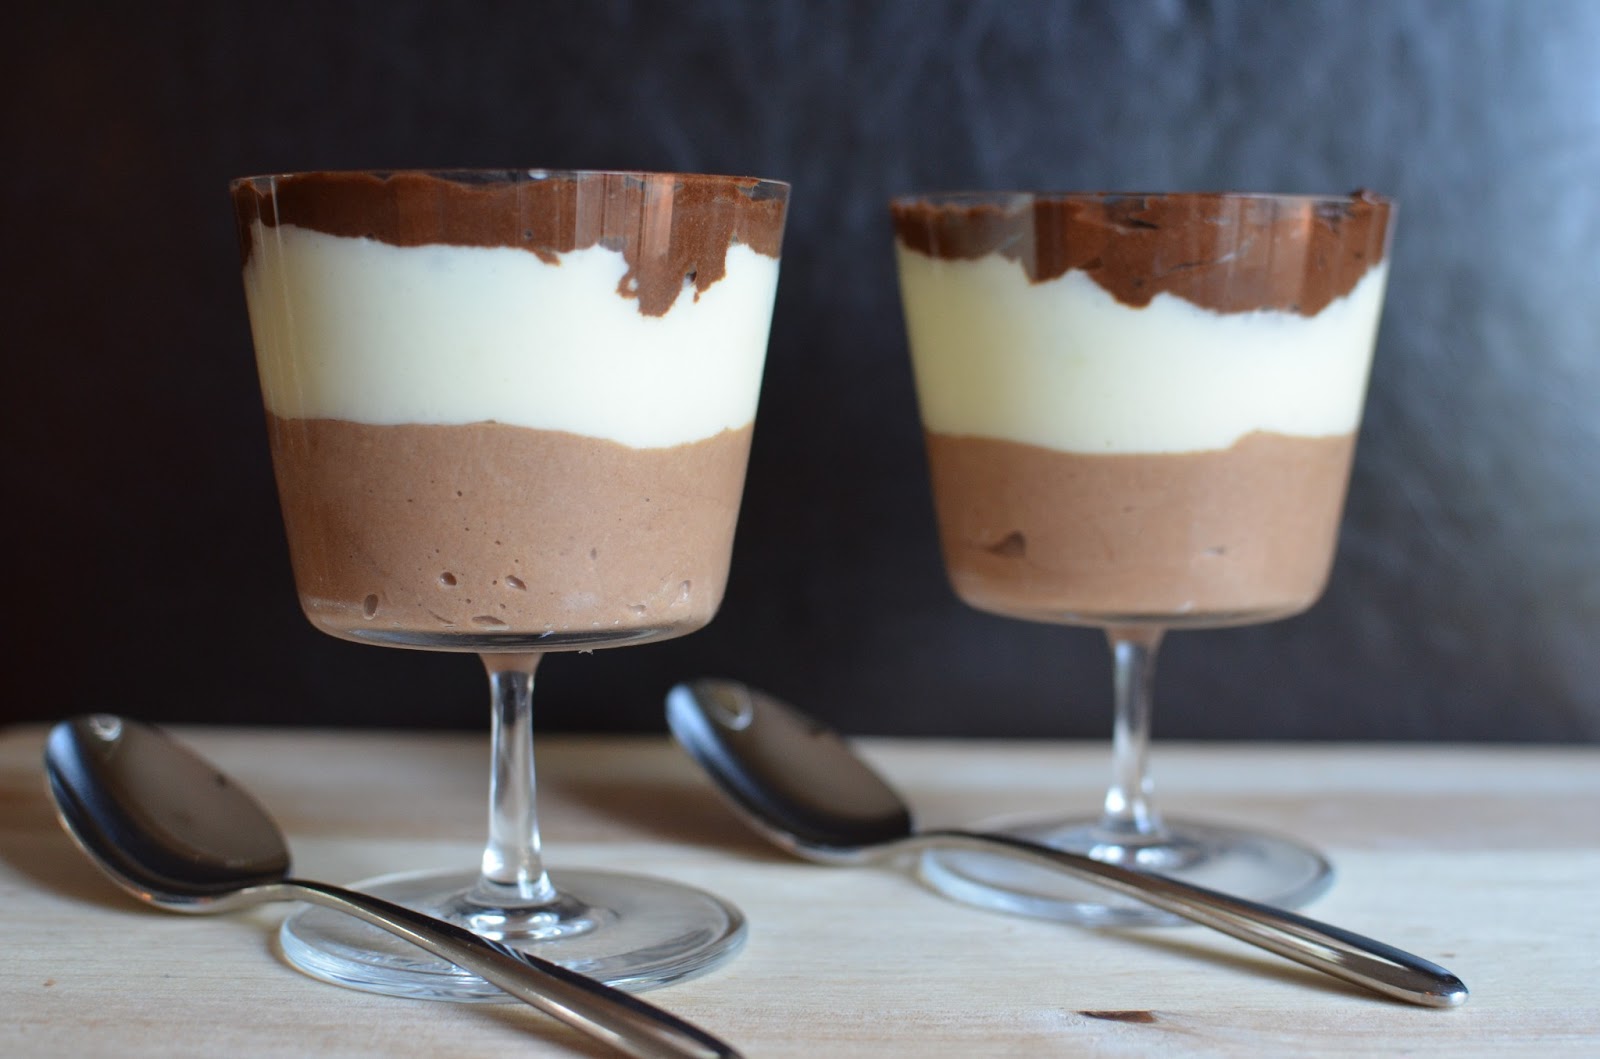 Playing with Flour: Triple chocolate mousse parfait